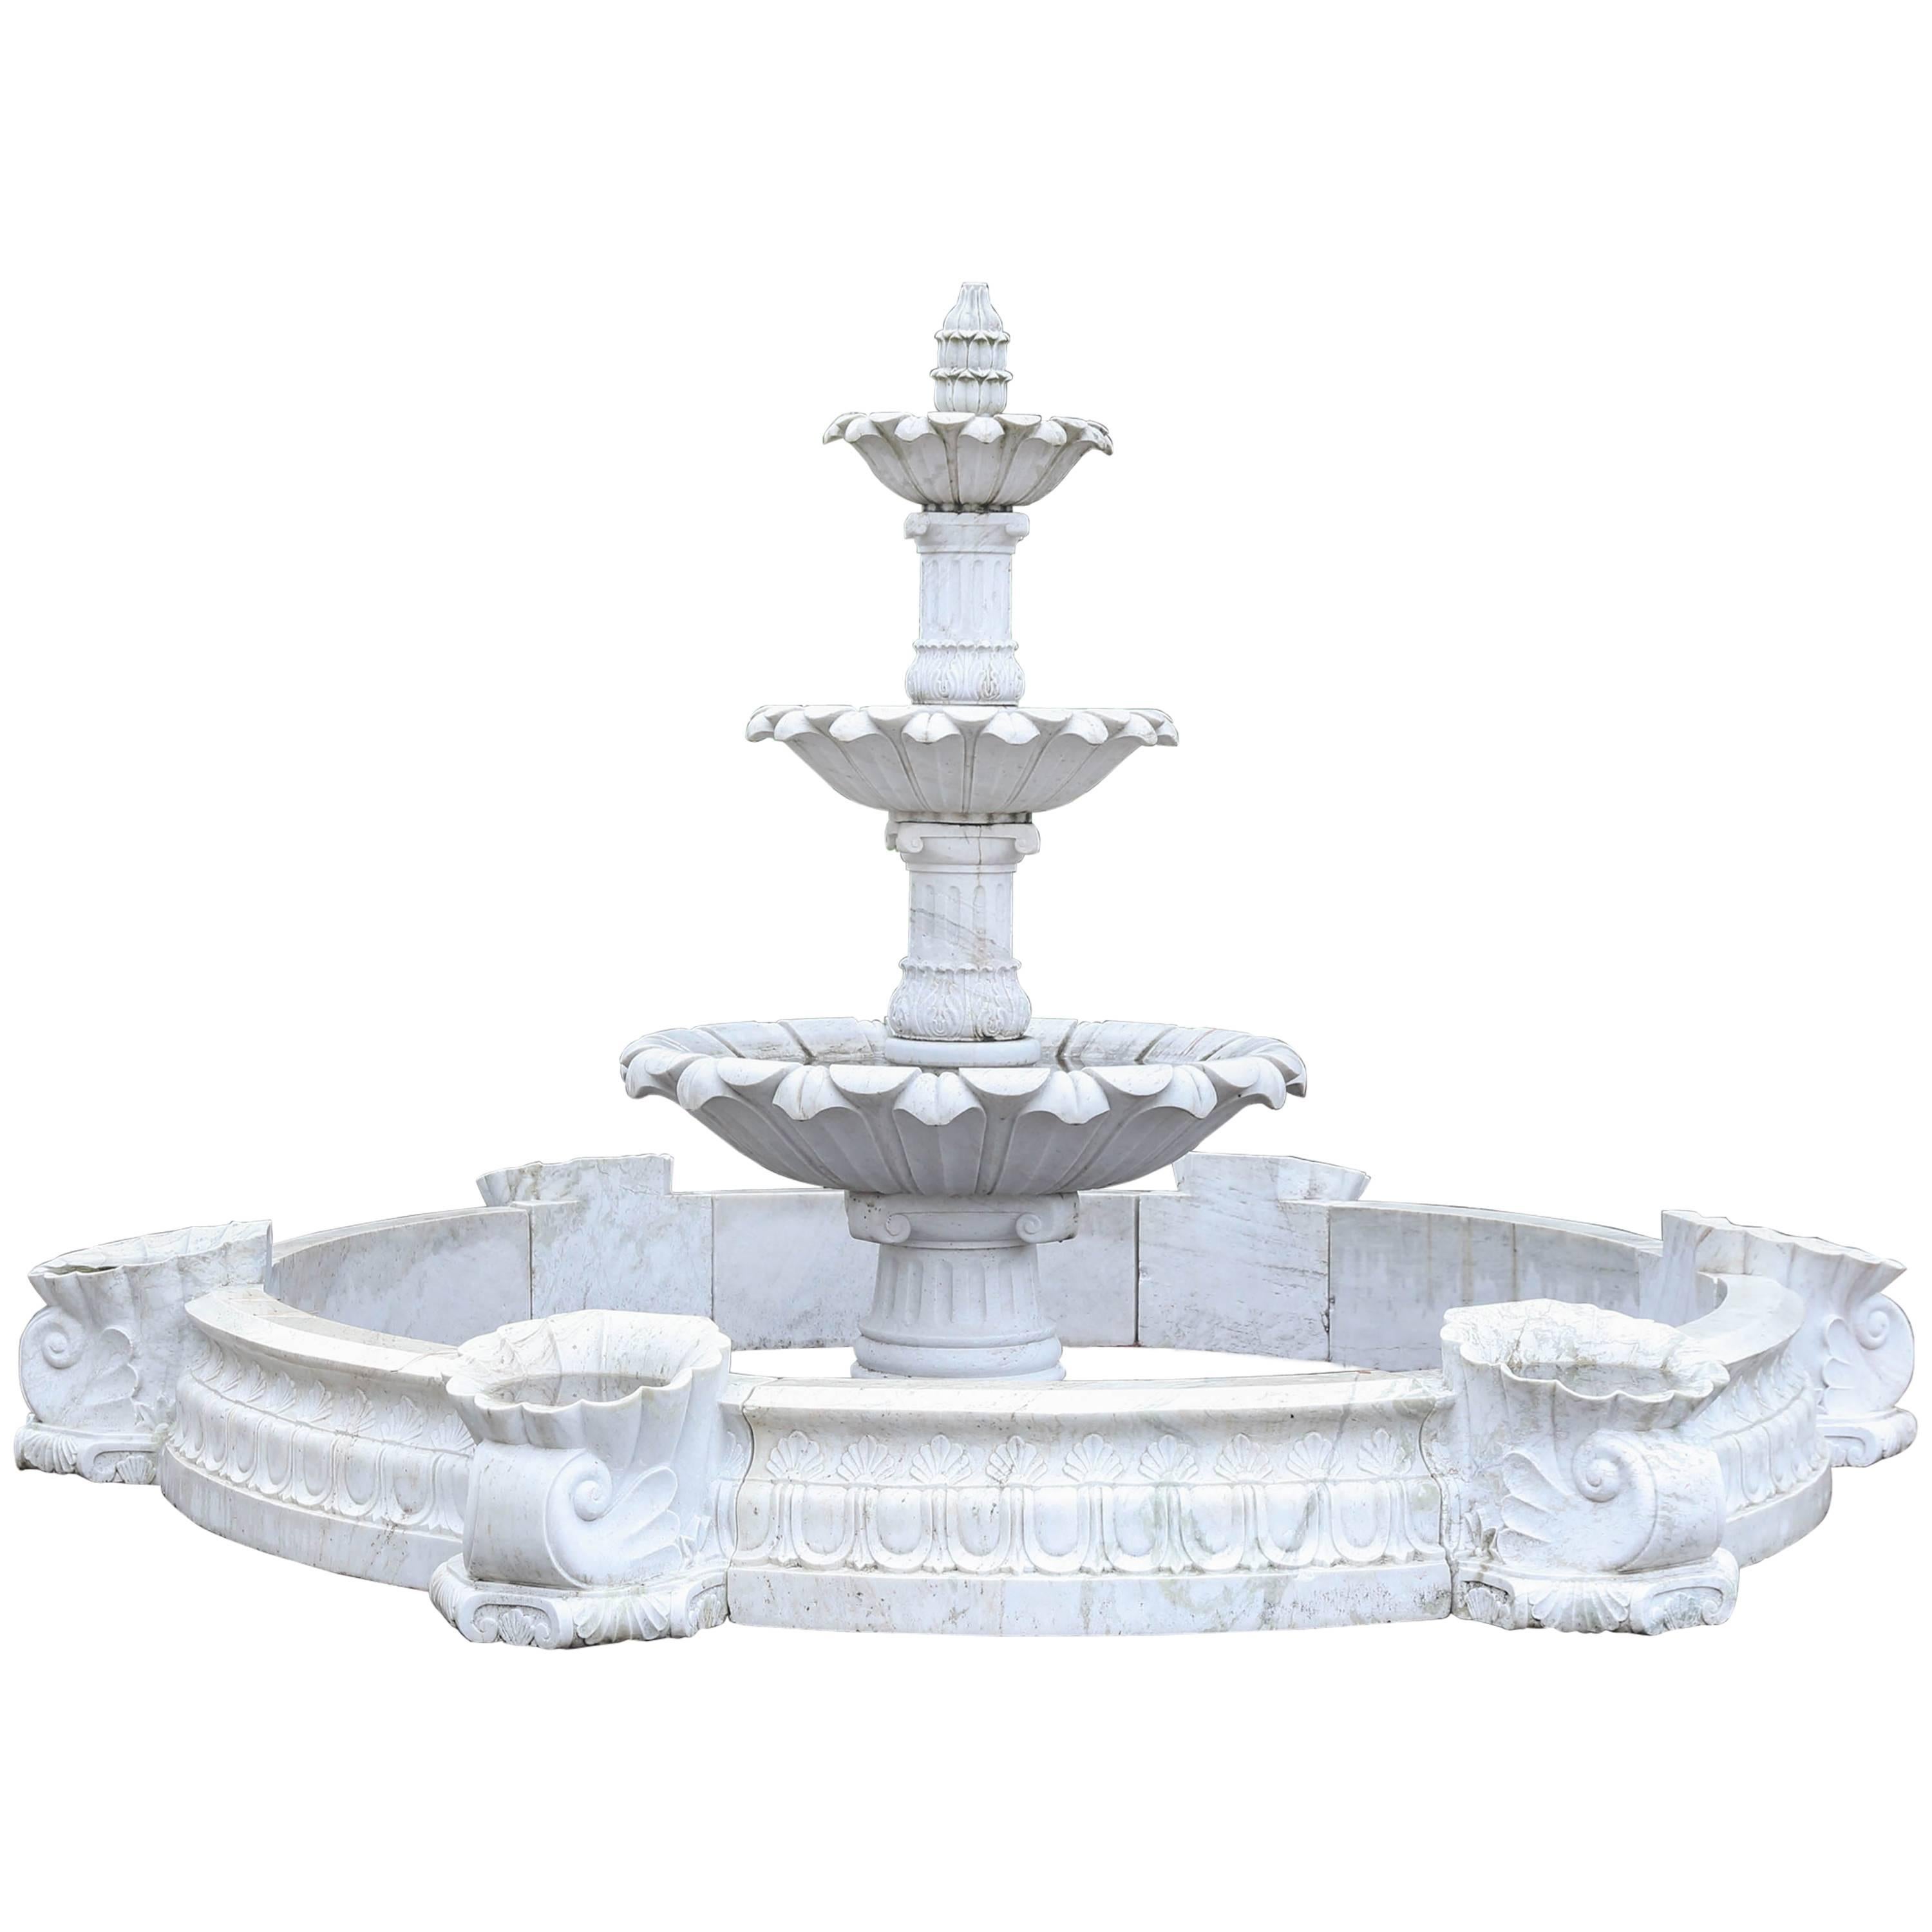 Hand-Carved White Marble Fountain with Surround from a Park in India